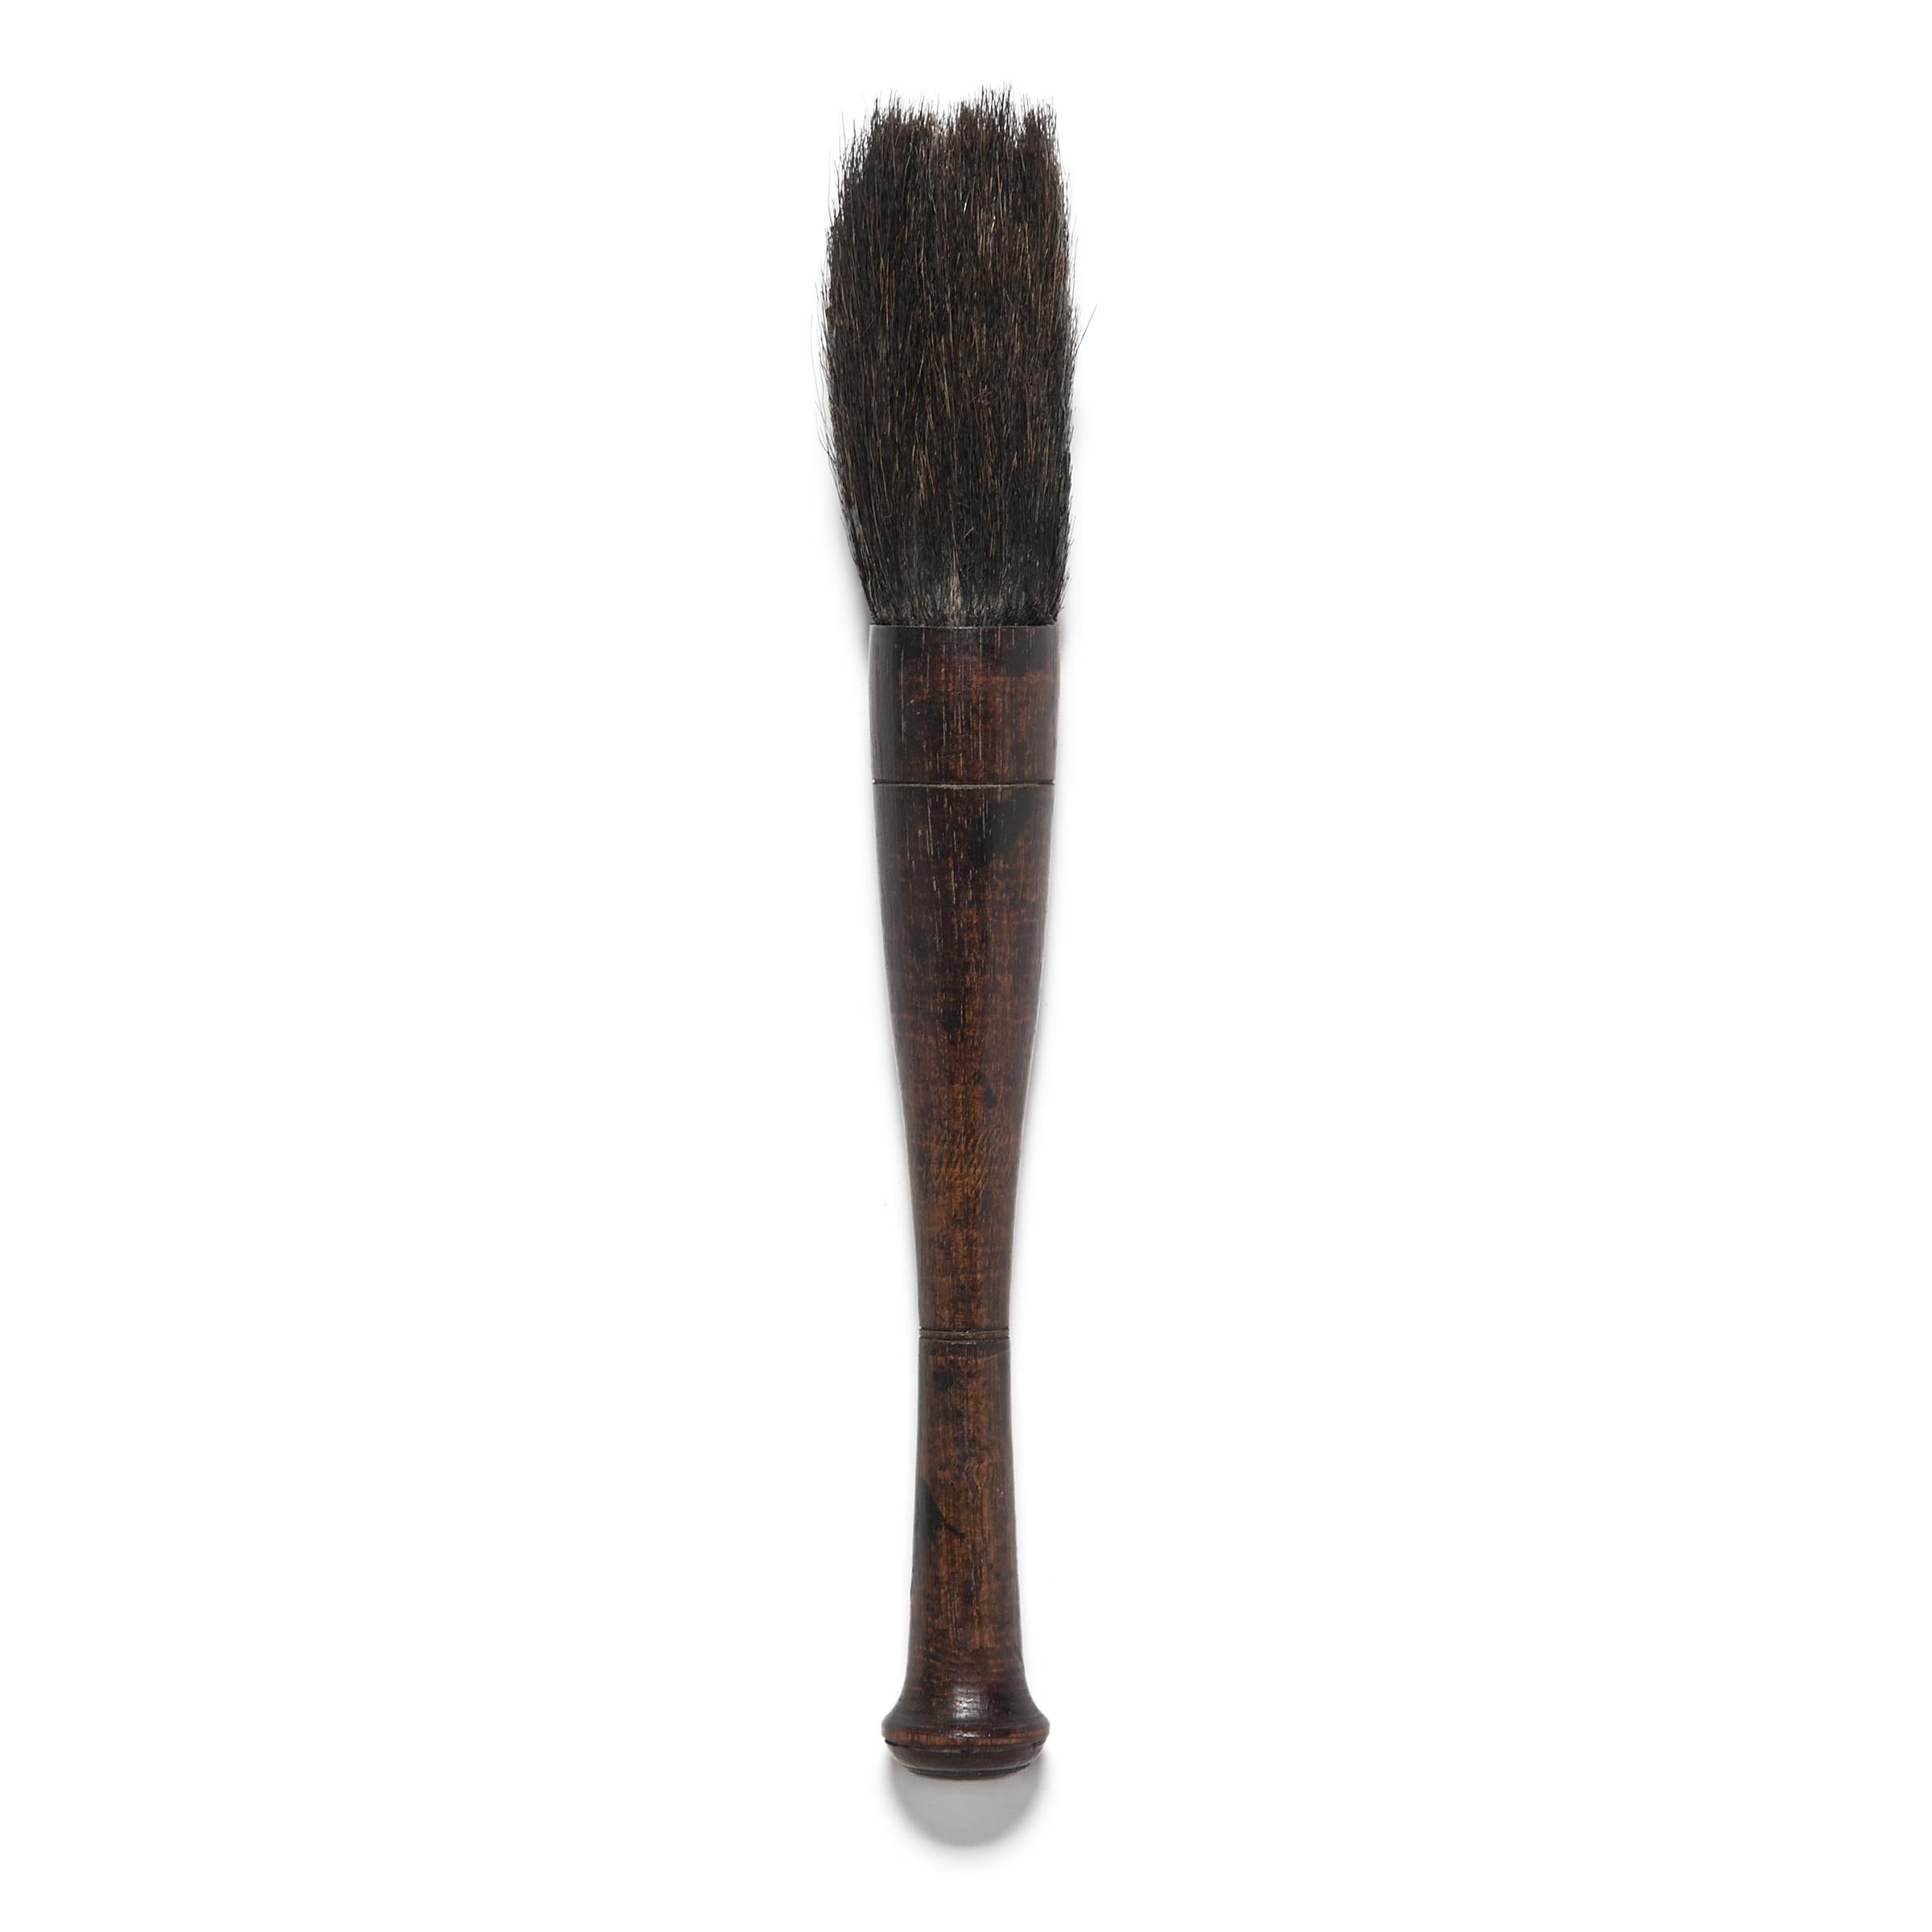 Along with paper, ink, and inkstone, the brush was part of the Four Treasures found in a scholar’s studio. Arguably the most important tool, the brush served as a direct link to the artist’s creative spirit. This early 20th century calligraphy brush